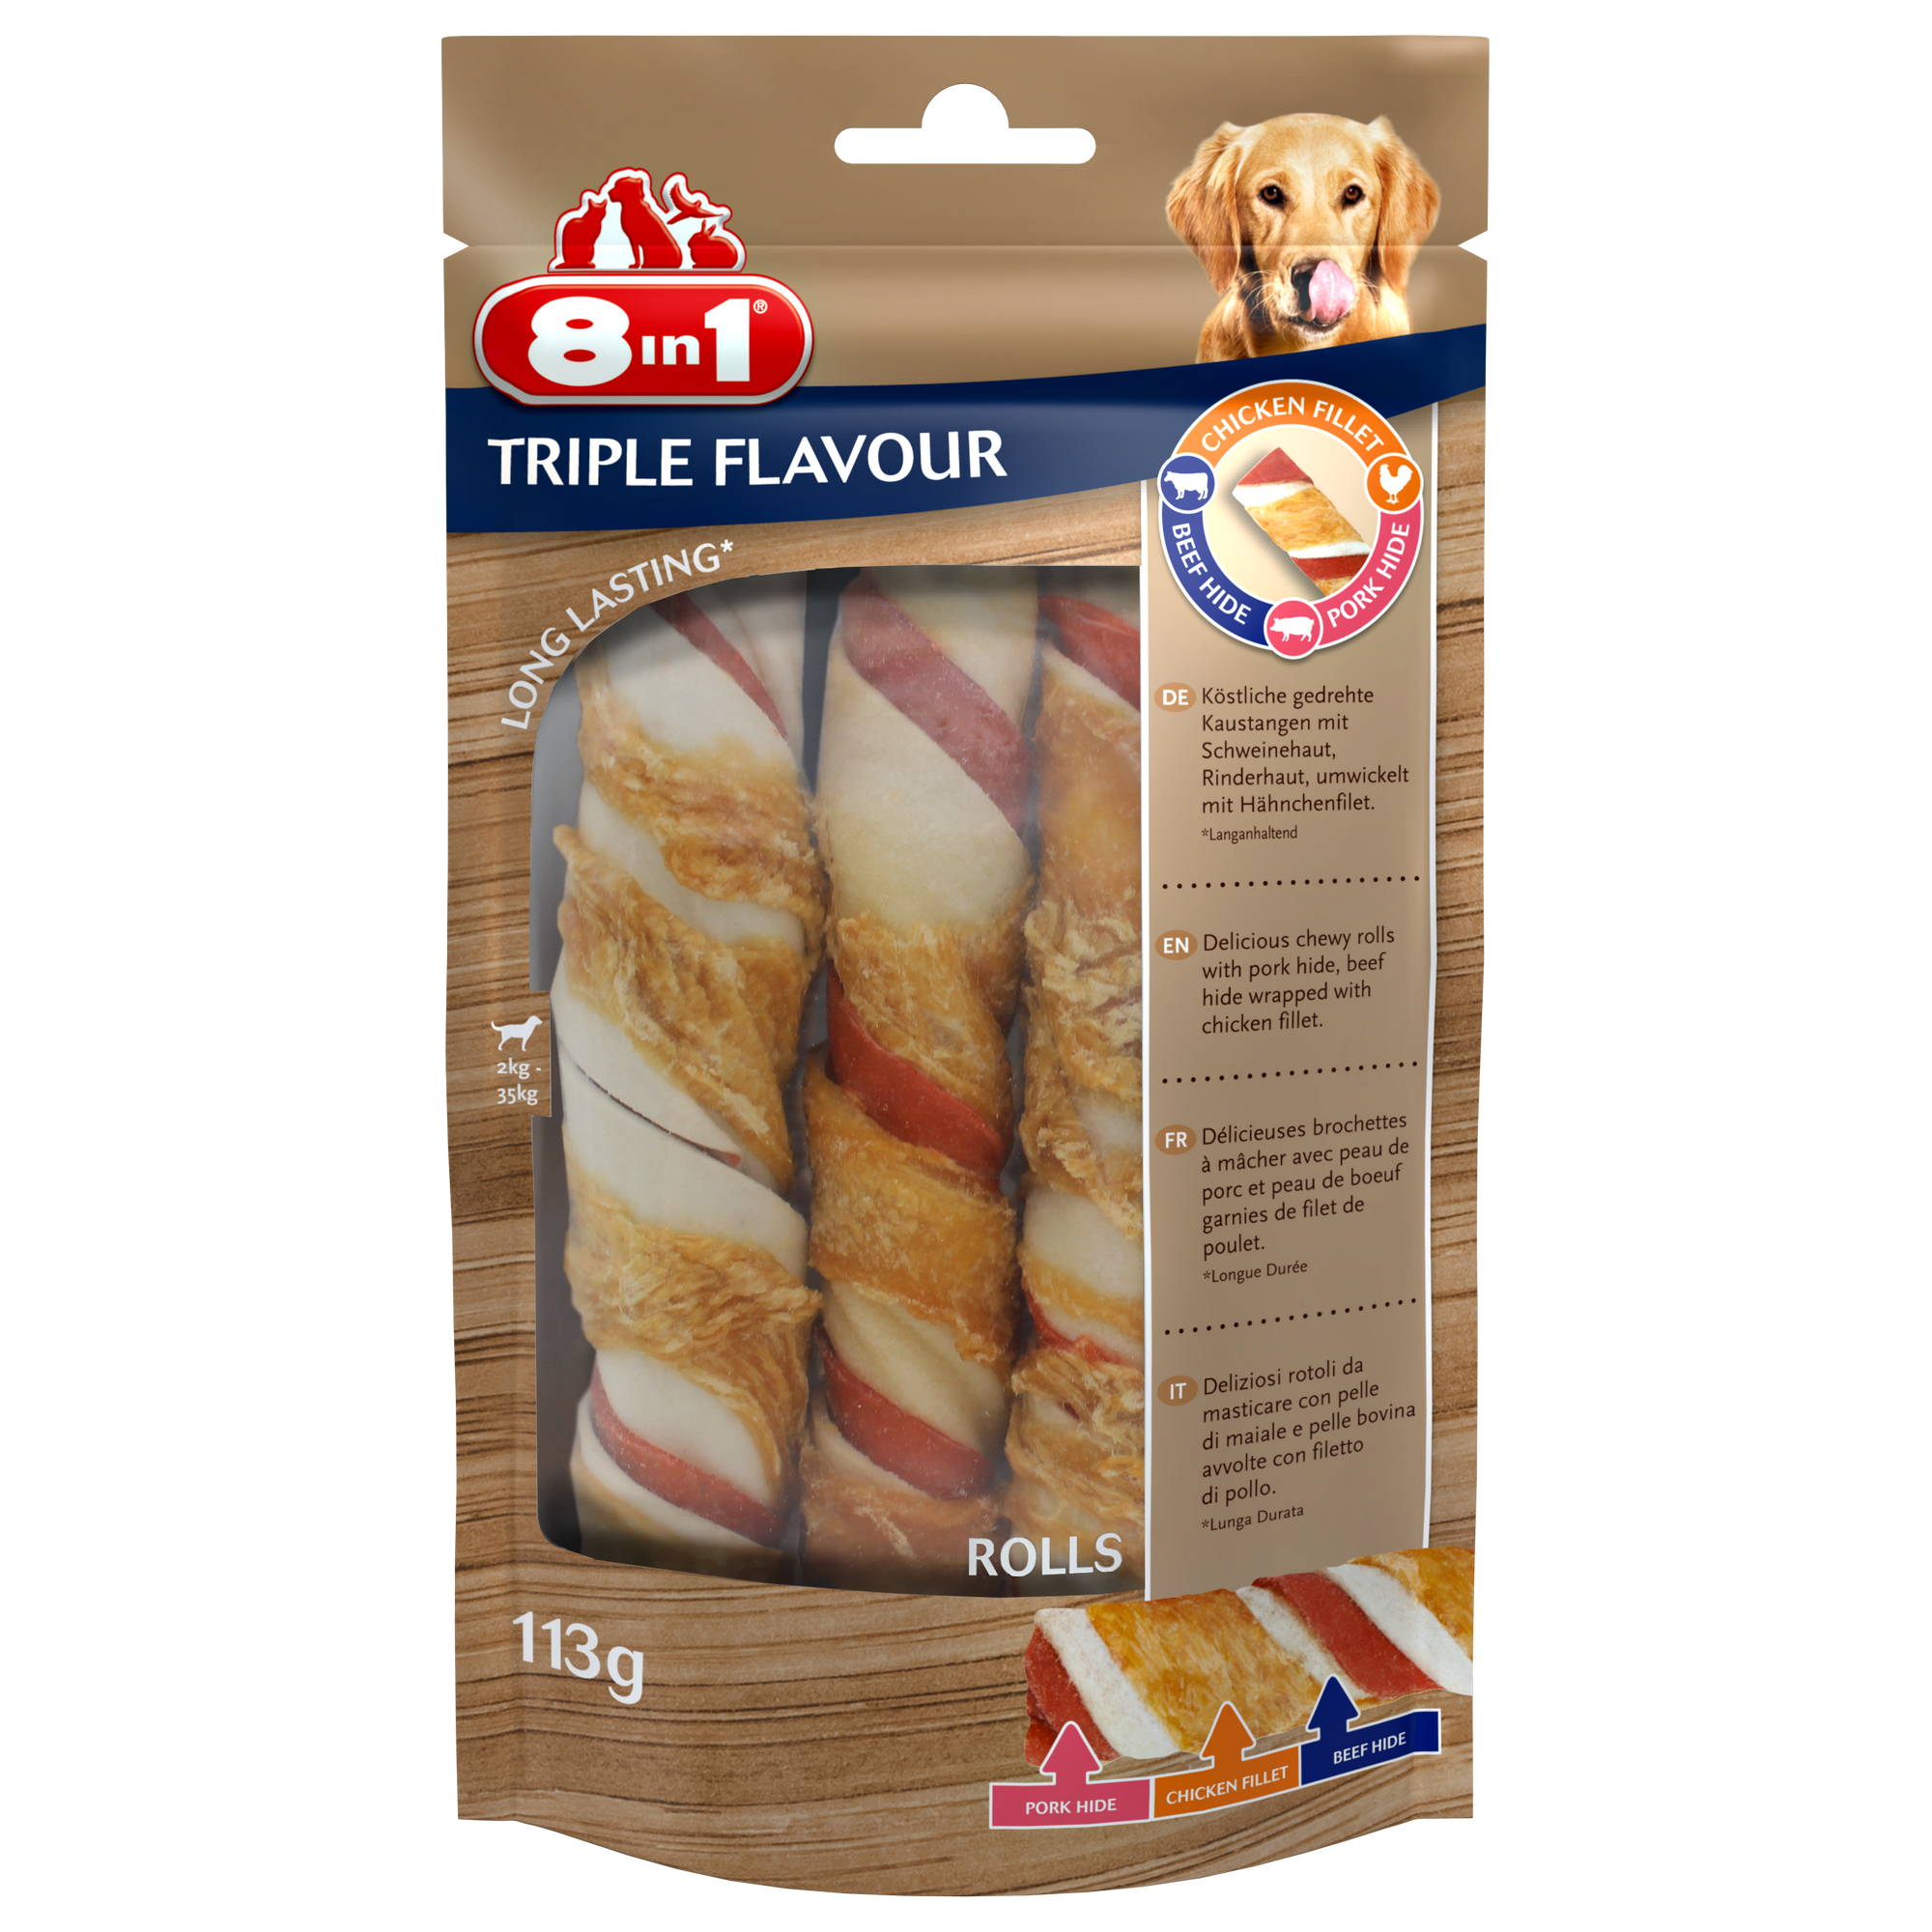 Hundesnack 'Triple Flavour' mit Rind/Schwein/Huhn 3 Stück + product picture